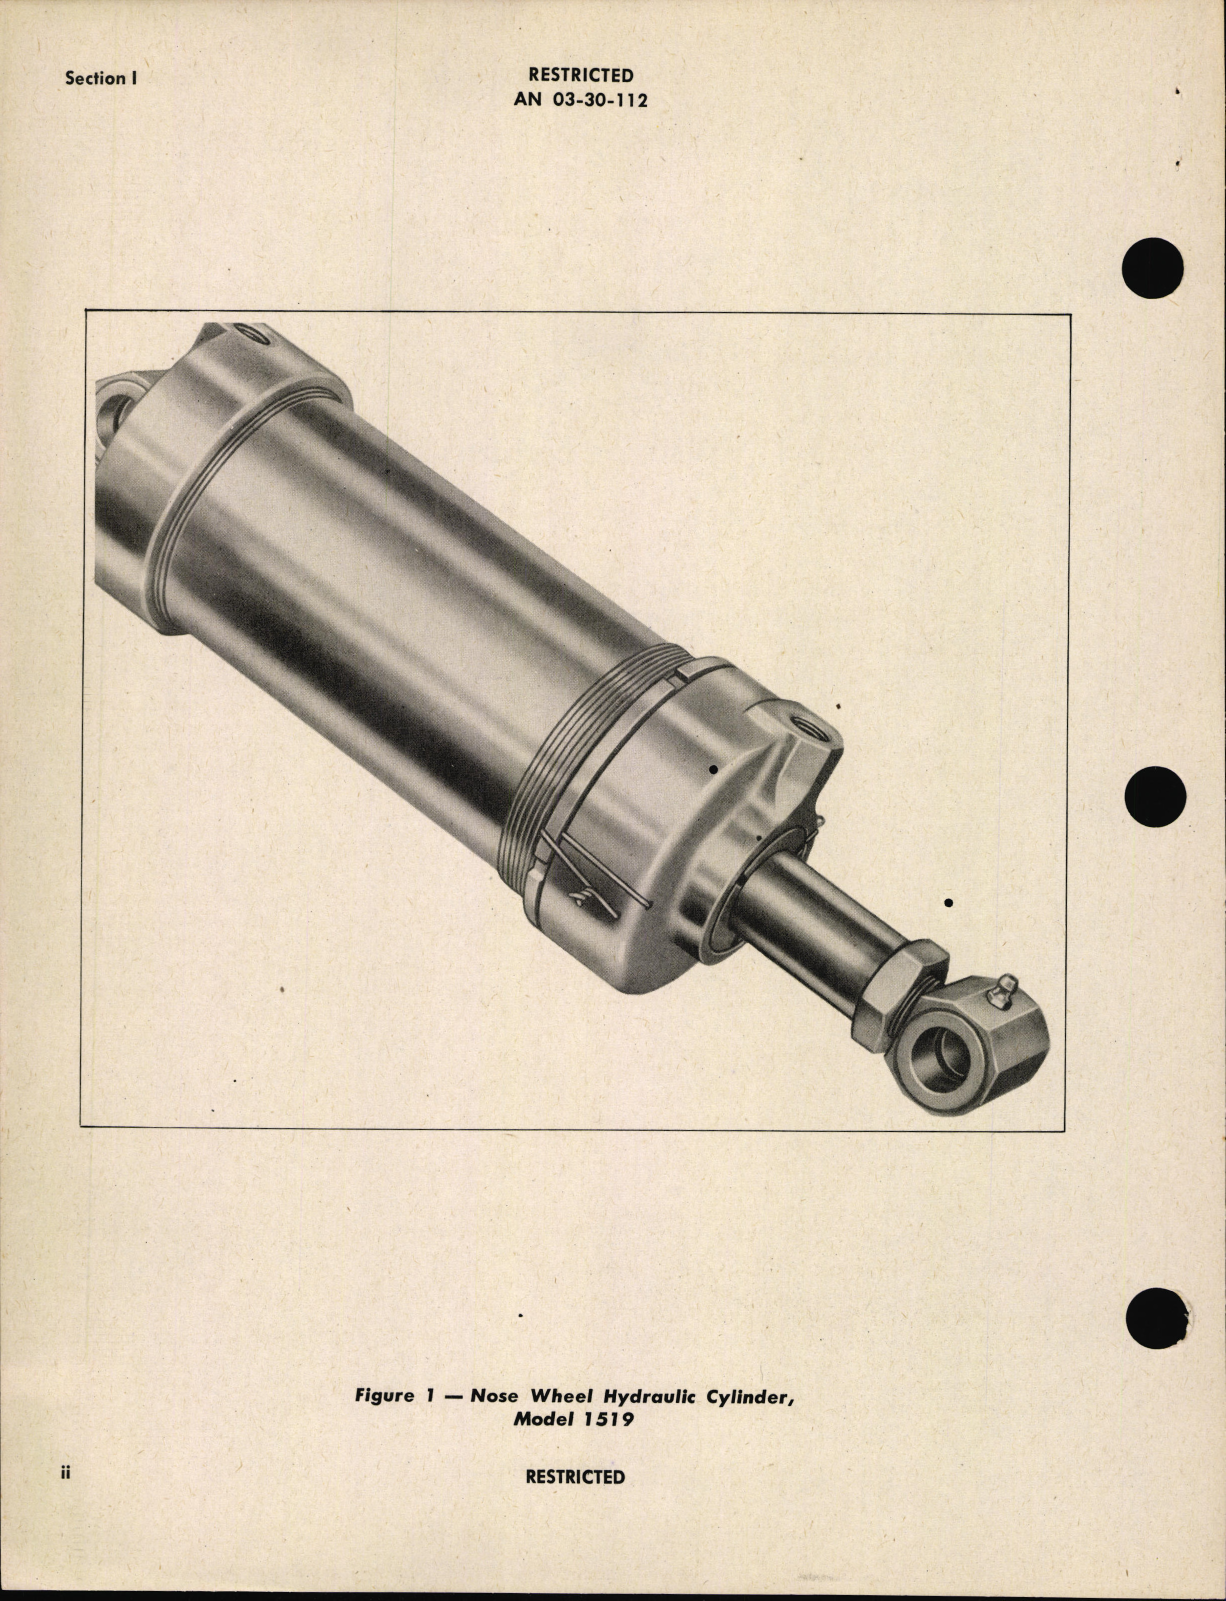 Sample page 4 from AirCorps Library document: Handbook of Instructions with Parts Catalog for Nose Wheel Hydraulic Actuating Cylinder